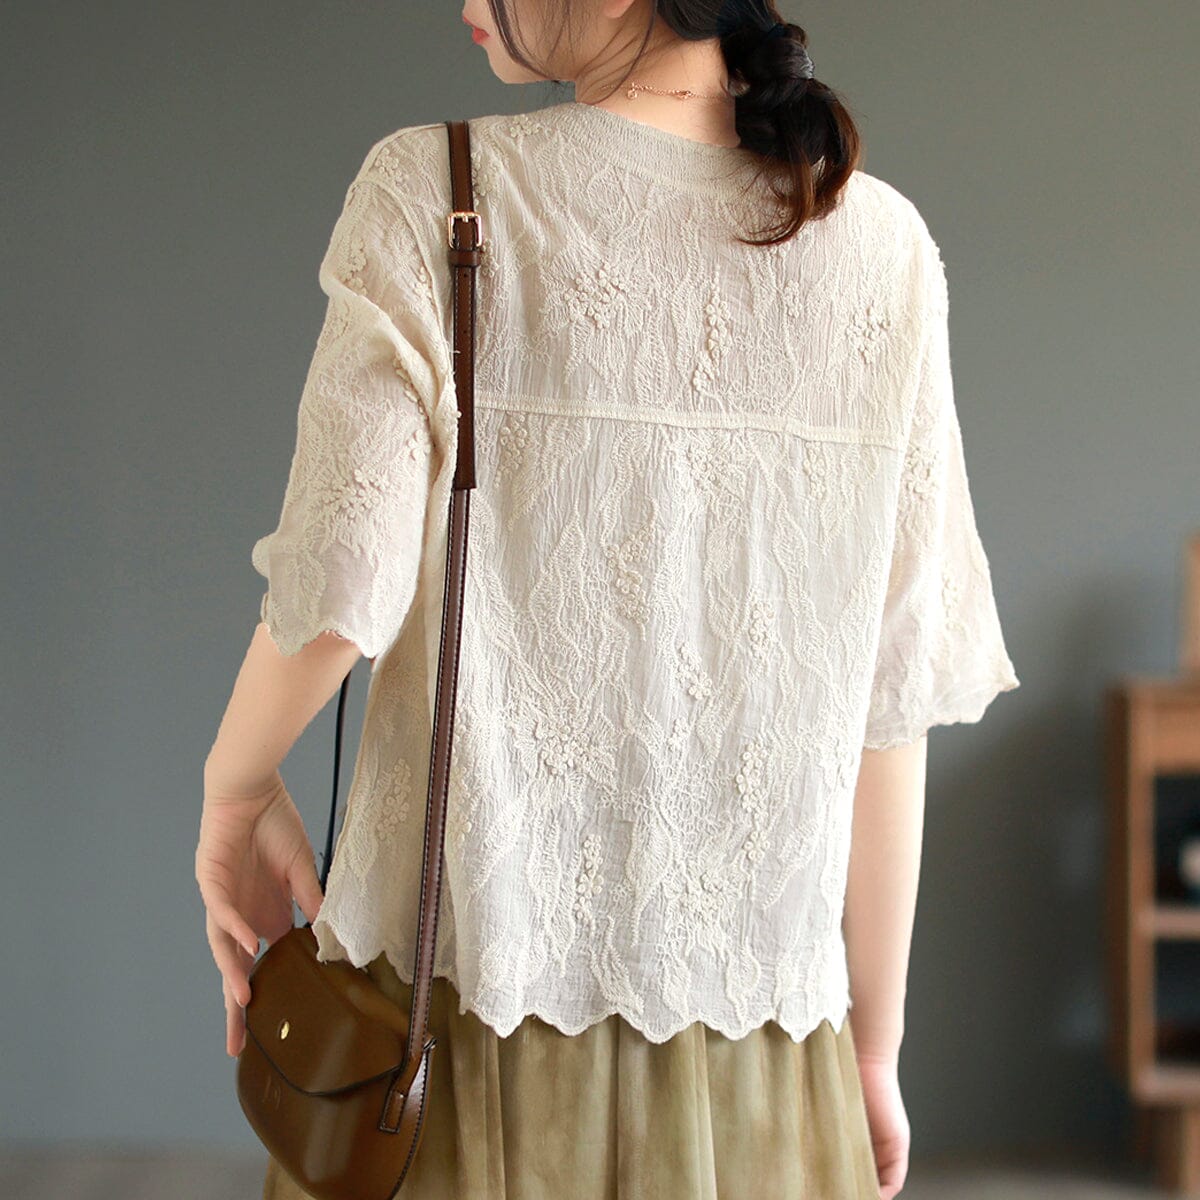 Summer Retro Embroidery Lace Casual V-Neck Blouse